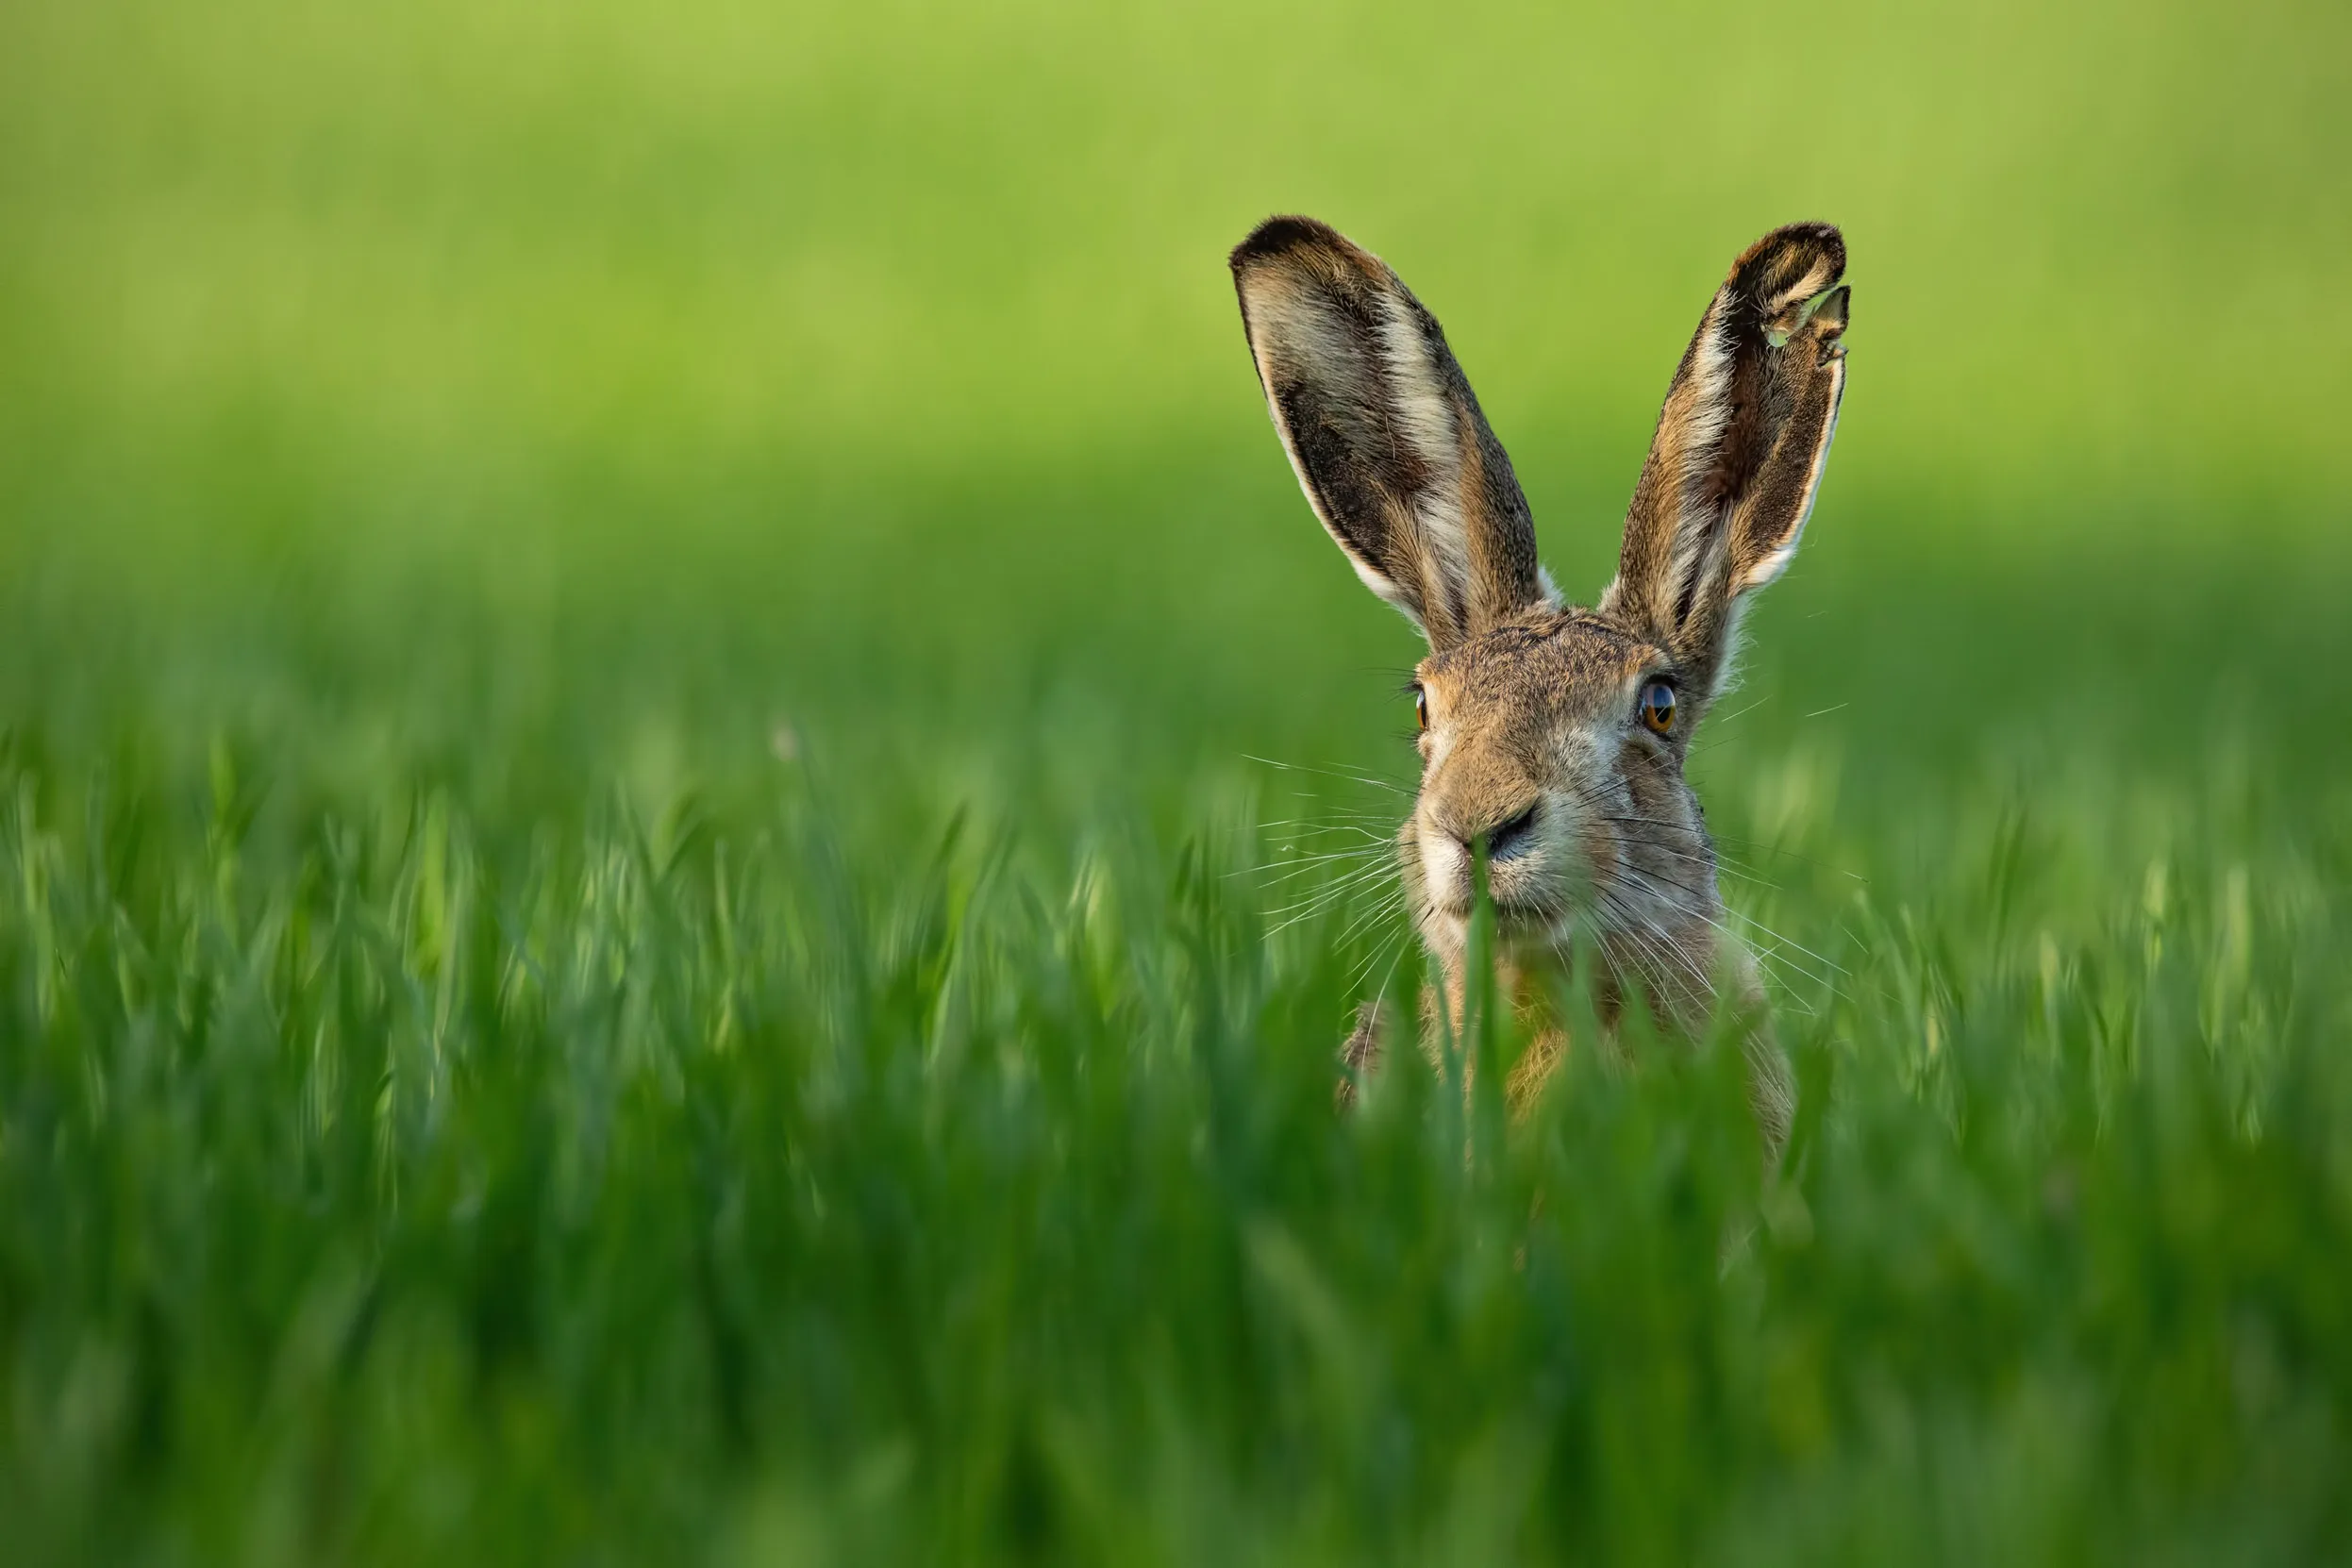 A Hare poking their head out from a field of long grass exposing their long ears.